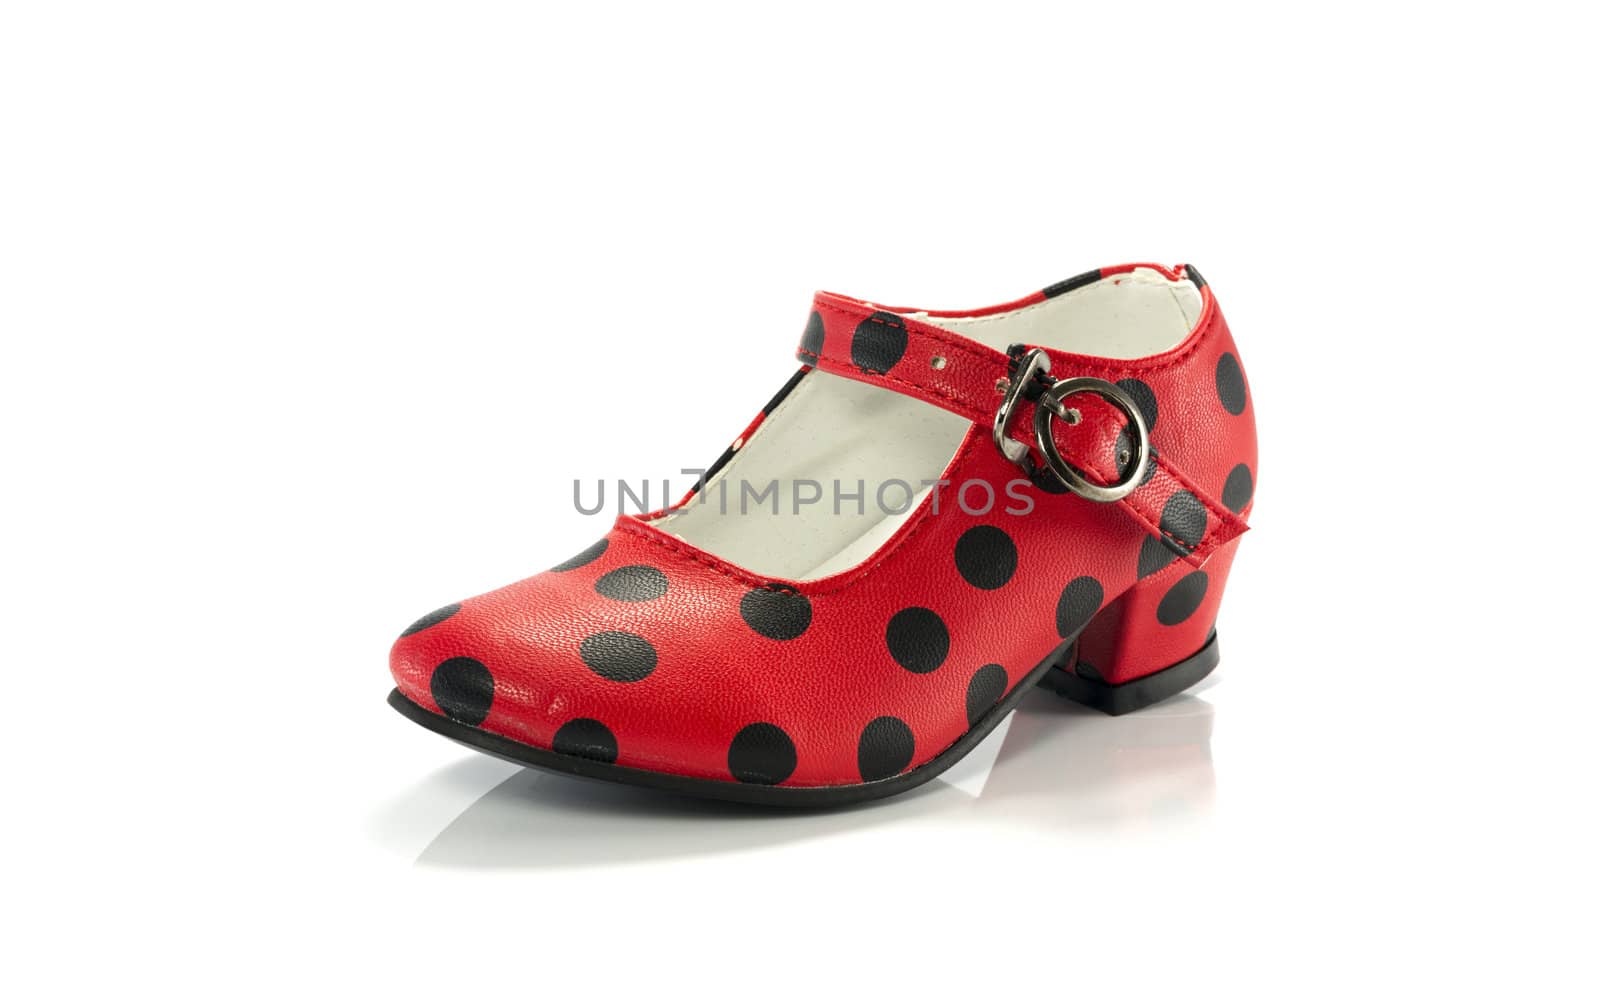 red shoe with black dots isolated on white